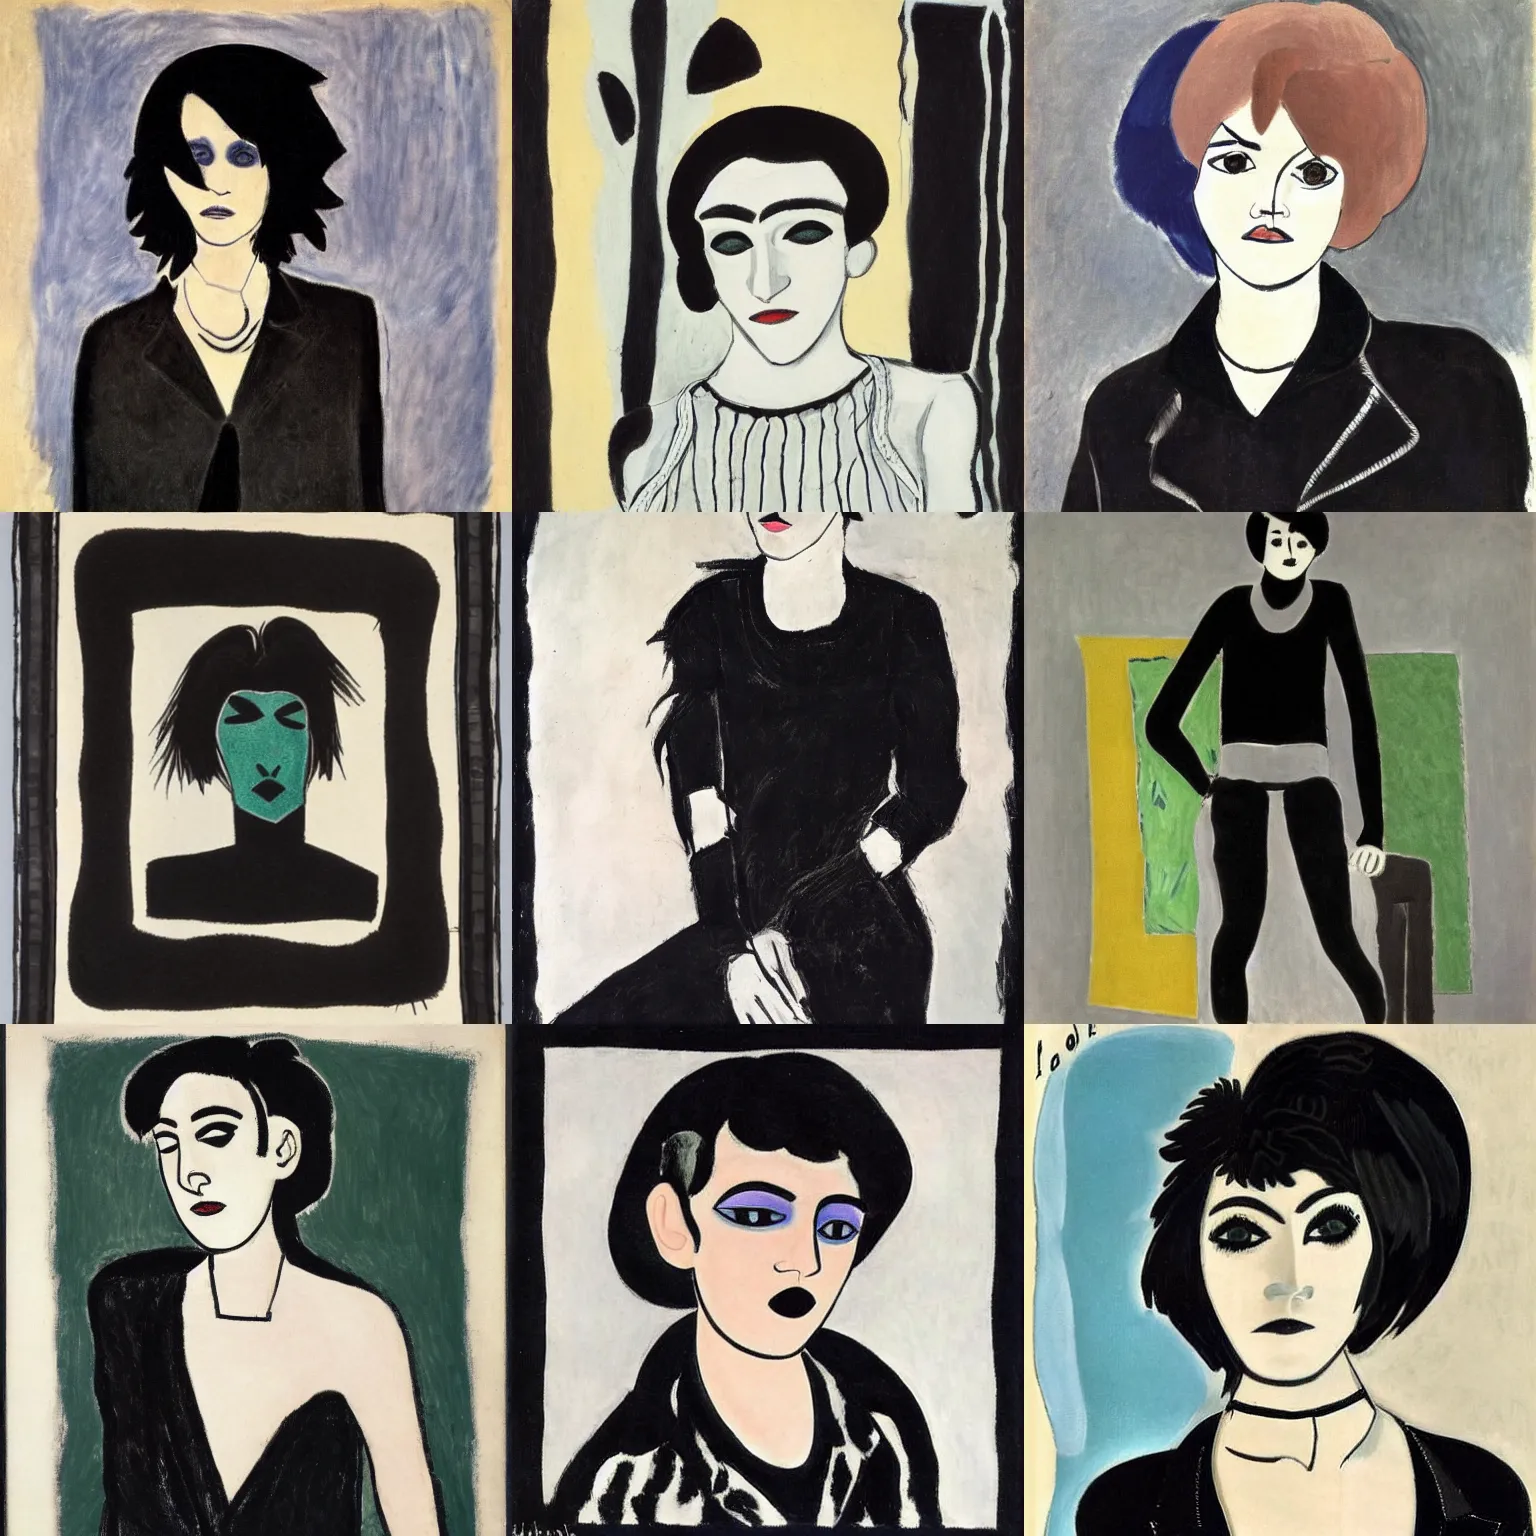 Prompt: an androgynous emo portrait by henri matisse. her hair is dark brown and cut into a short, messy pixie cut. she has large entirely - black evil eyes. she is wearing a black tank top, a black leather jacket, a black knee - length skirt, a black choker, and black leather boots.